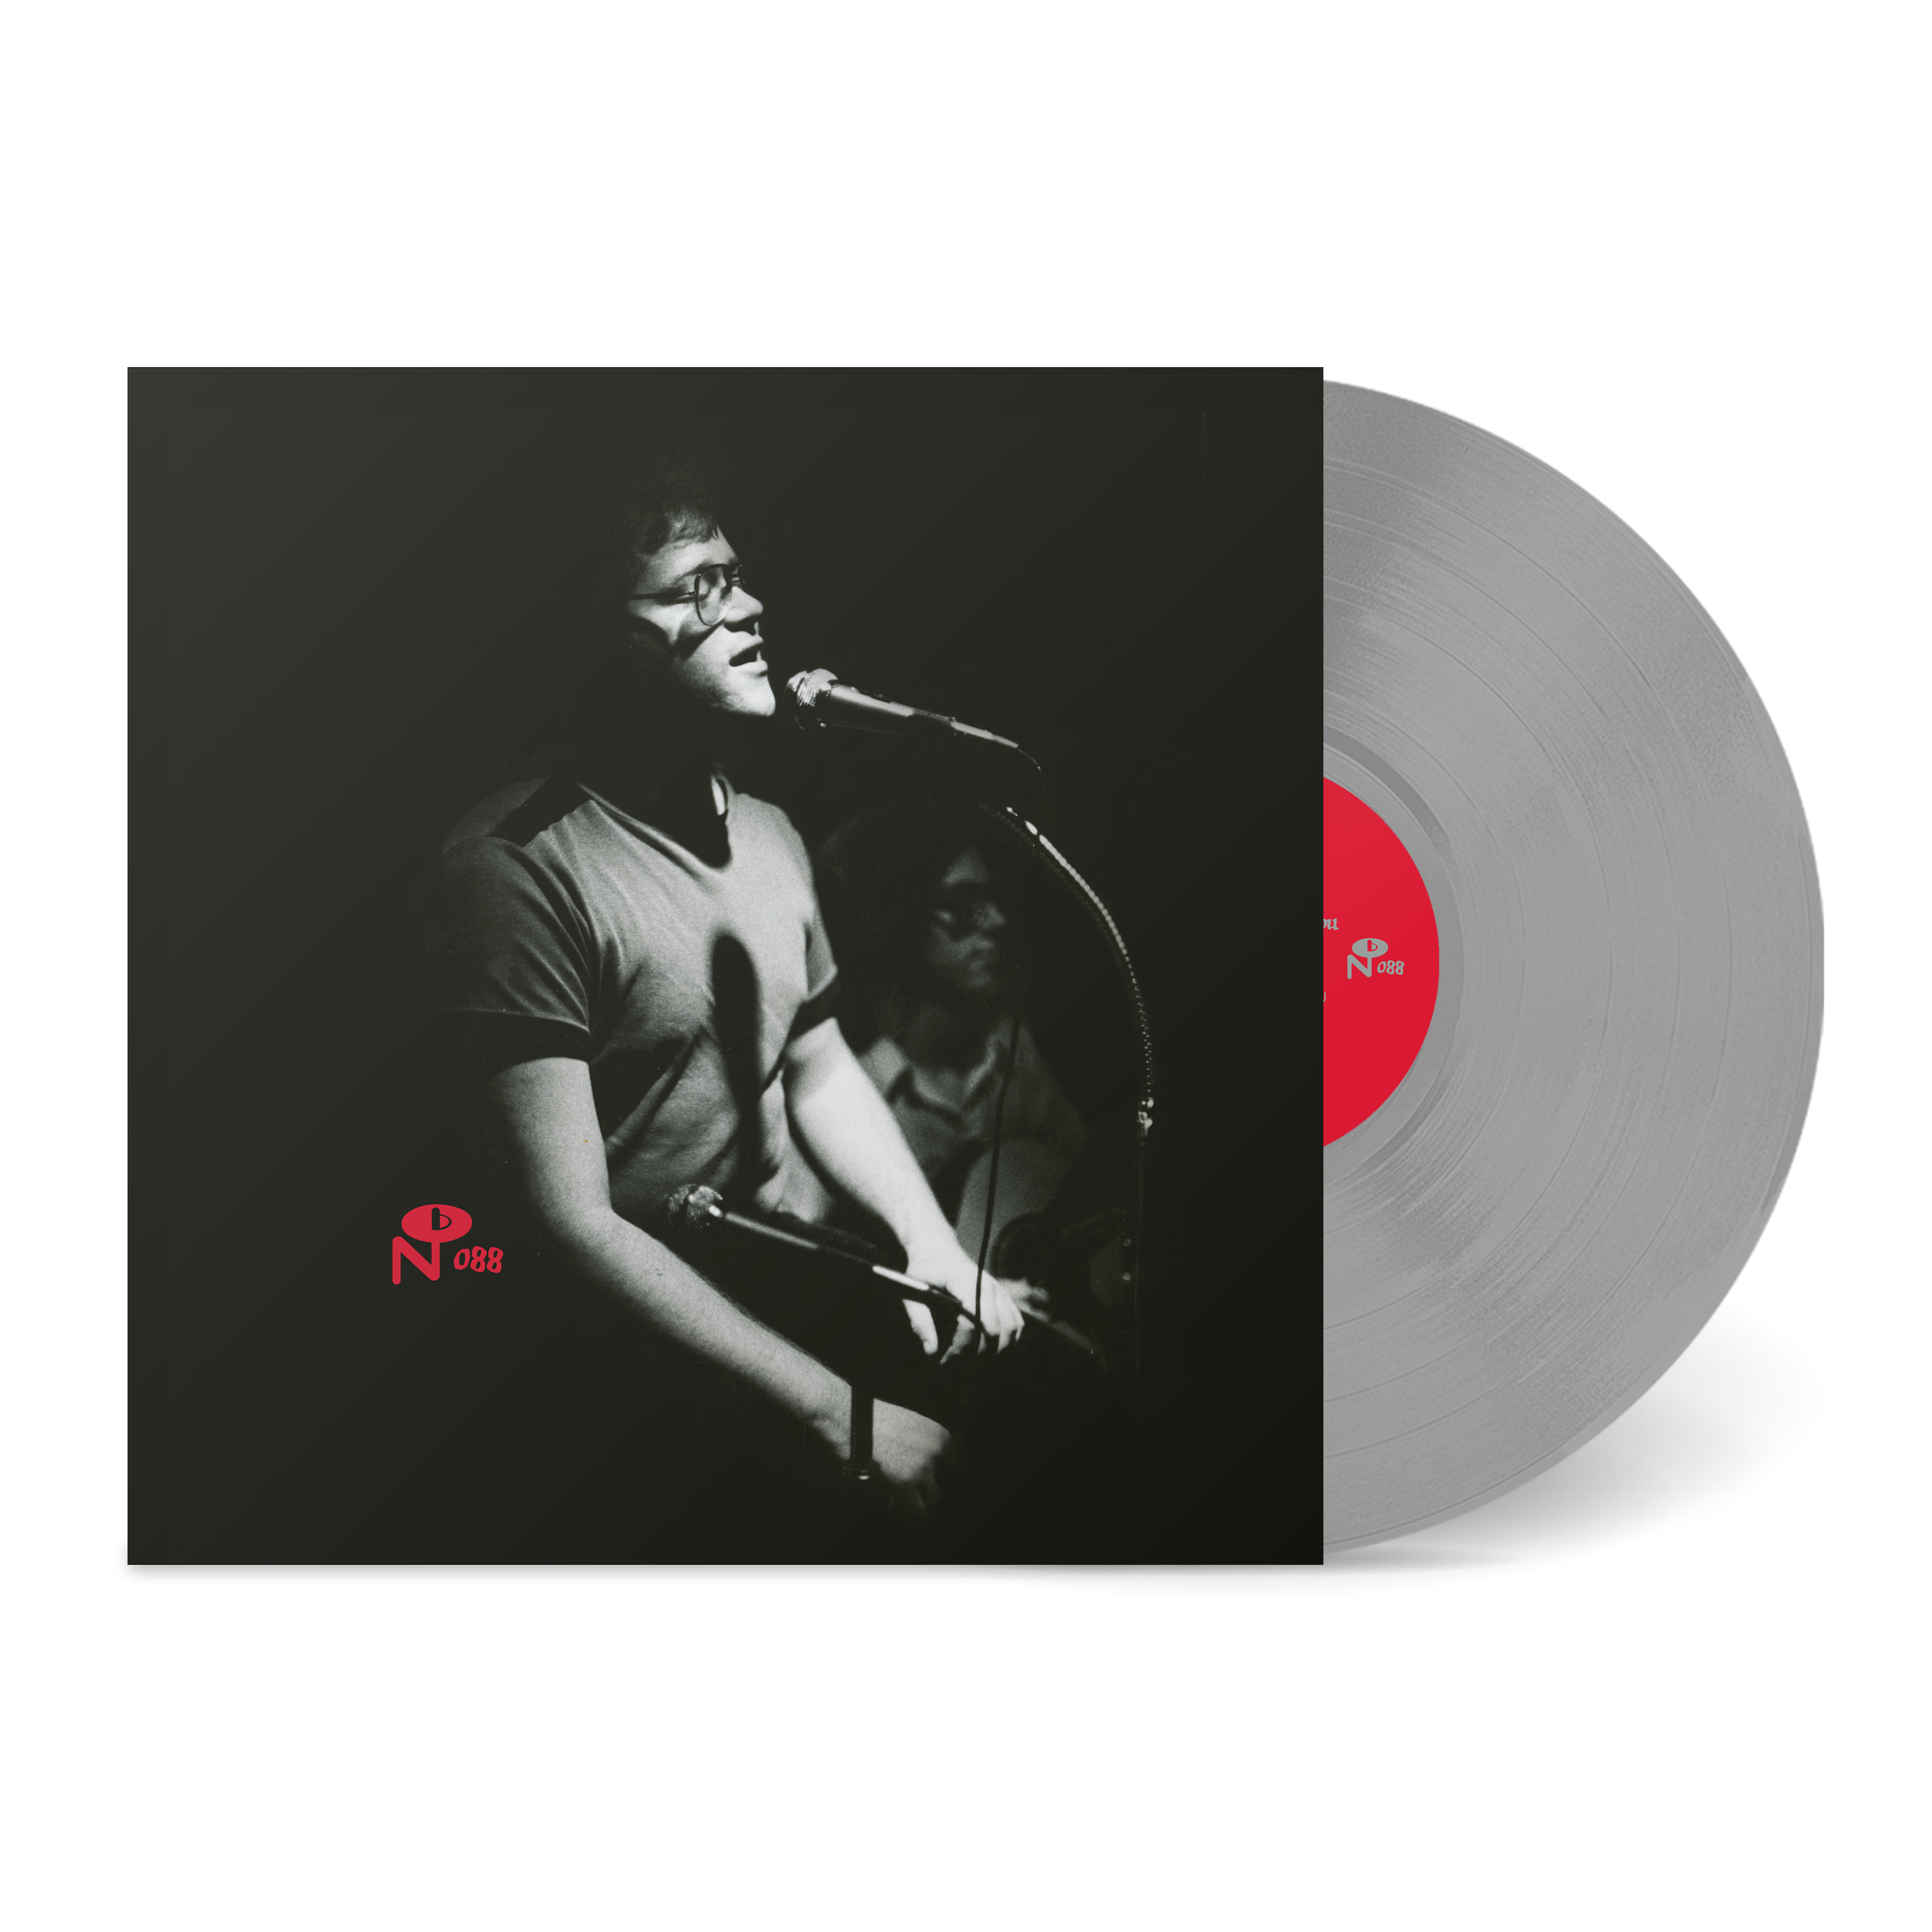 Charles Brown - I Just Want To Talk To You: Limited 'Sleepy Creek' Silver Vinyl LP